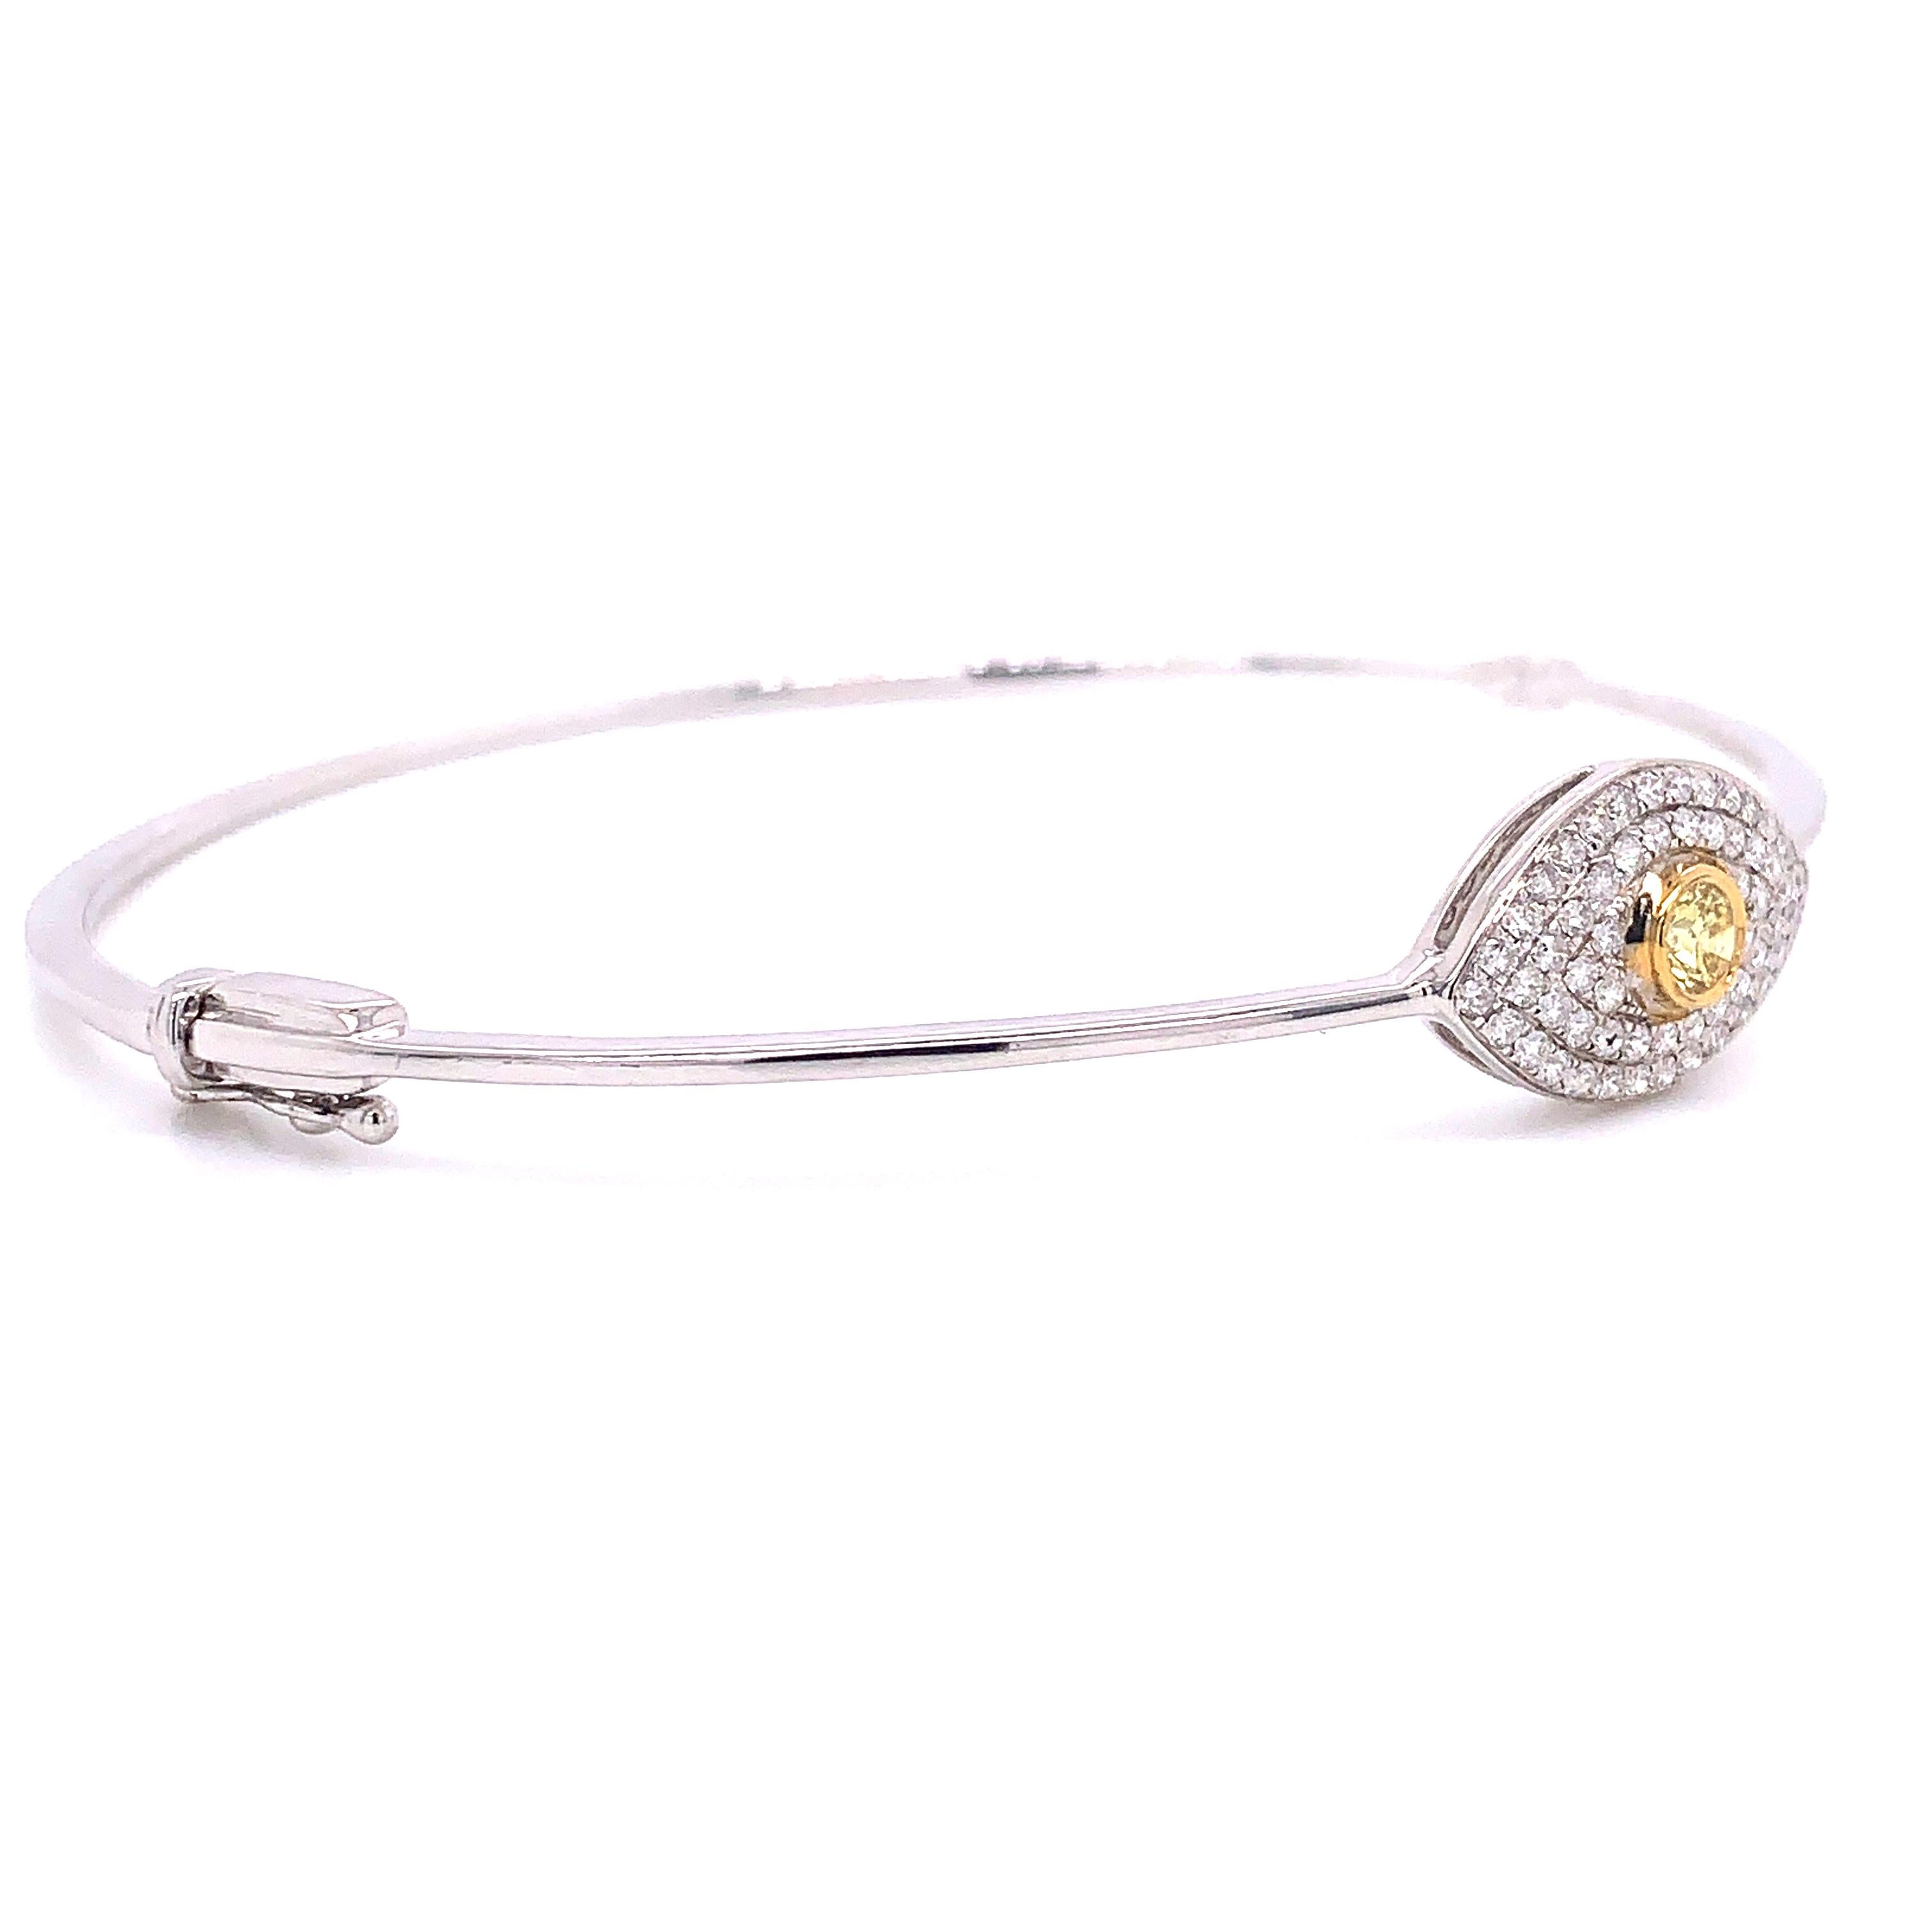 0.61 Carat Natural Fancy Yellow Diamond And White Diamond Bangle made by Shimon's Creations will delight you endlessly as you can wear it from day into night.
This affordable gorgeous and unique bangle features 0.17 carats of a natural fancy yellow